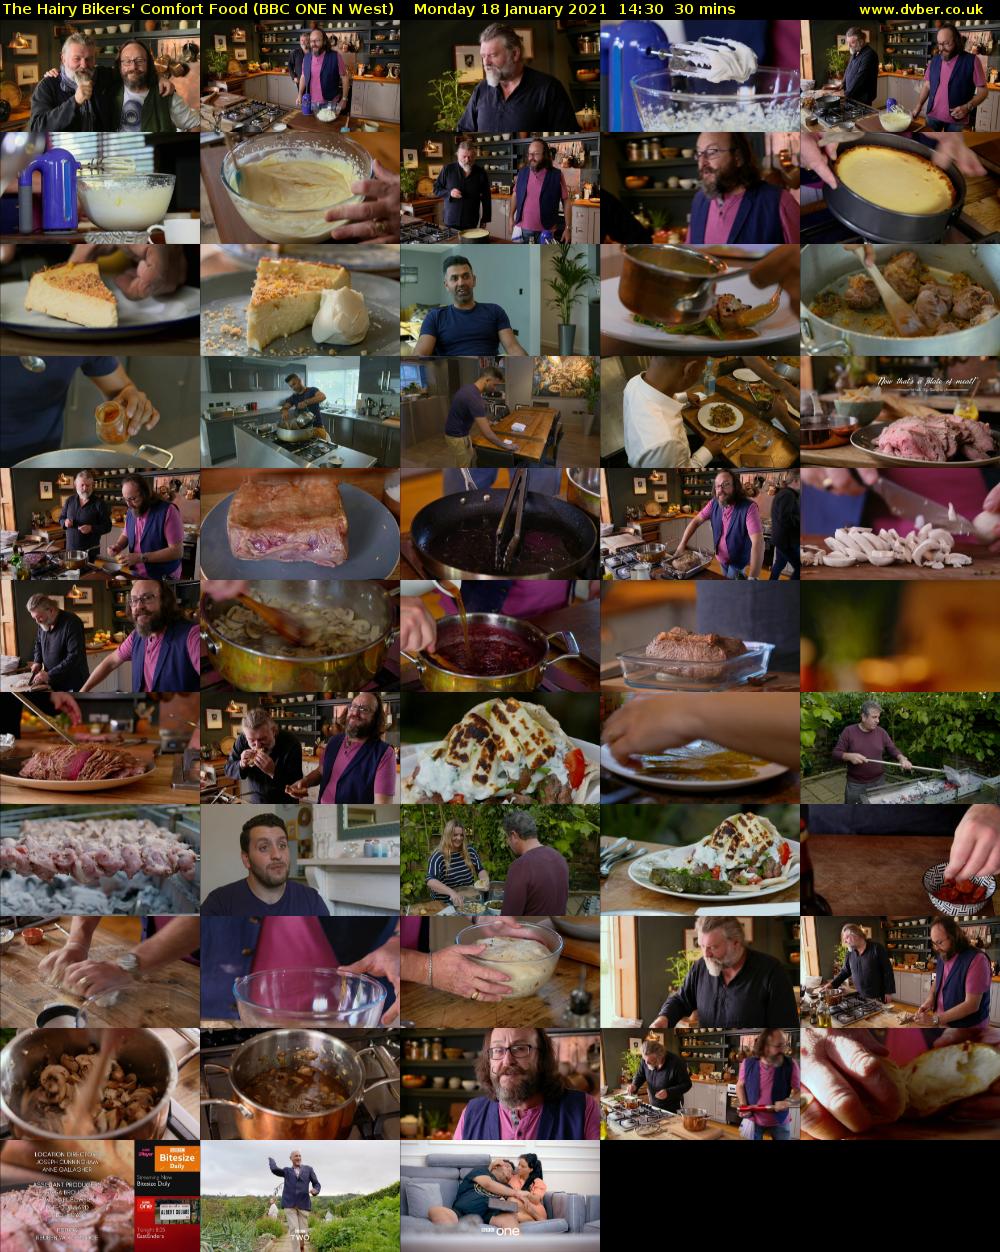 The Hairy Bikers' Comfort Food (BBC ONE N West) Monday 18 January 2021 14:30 - 15:00